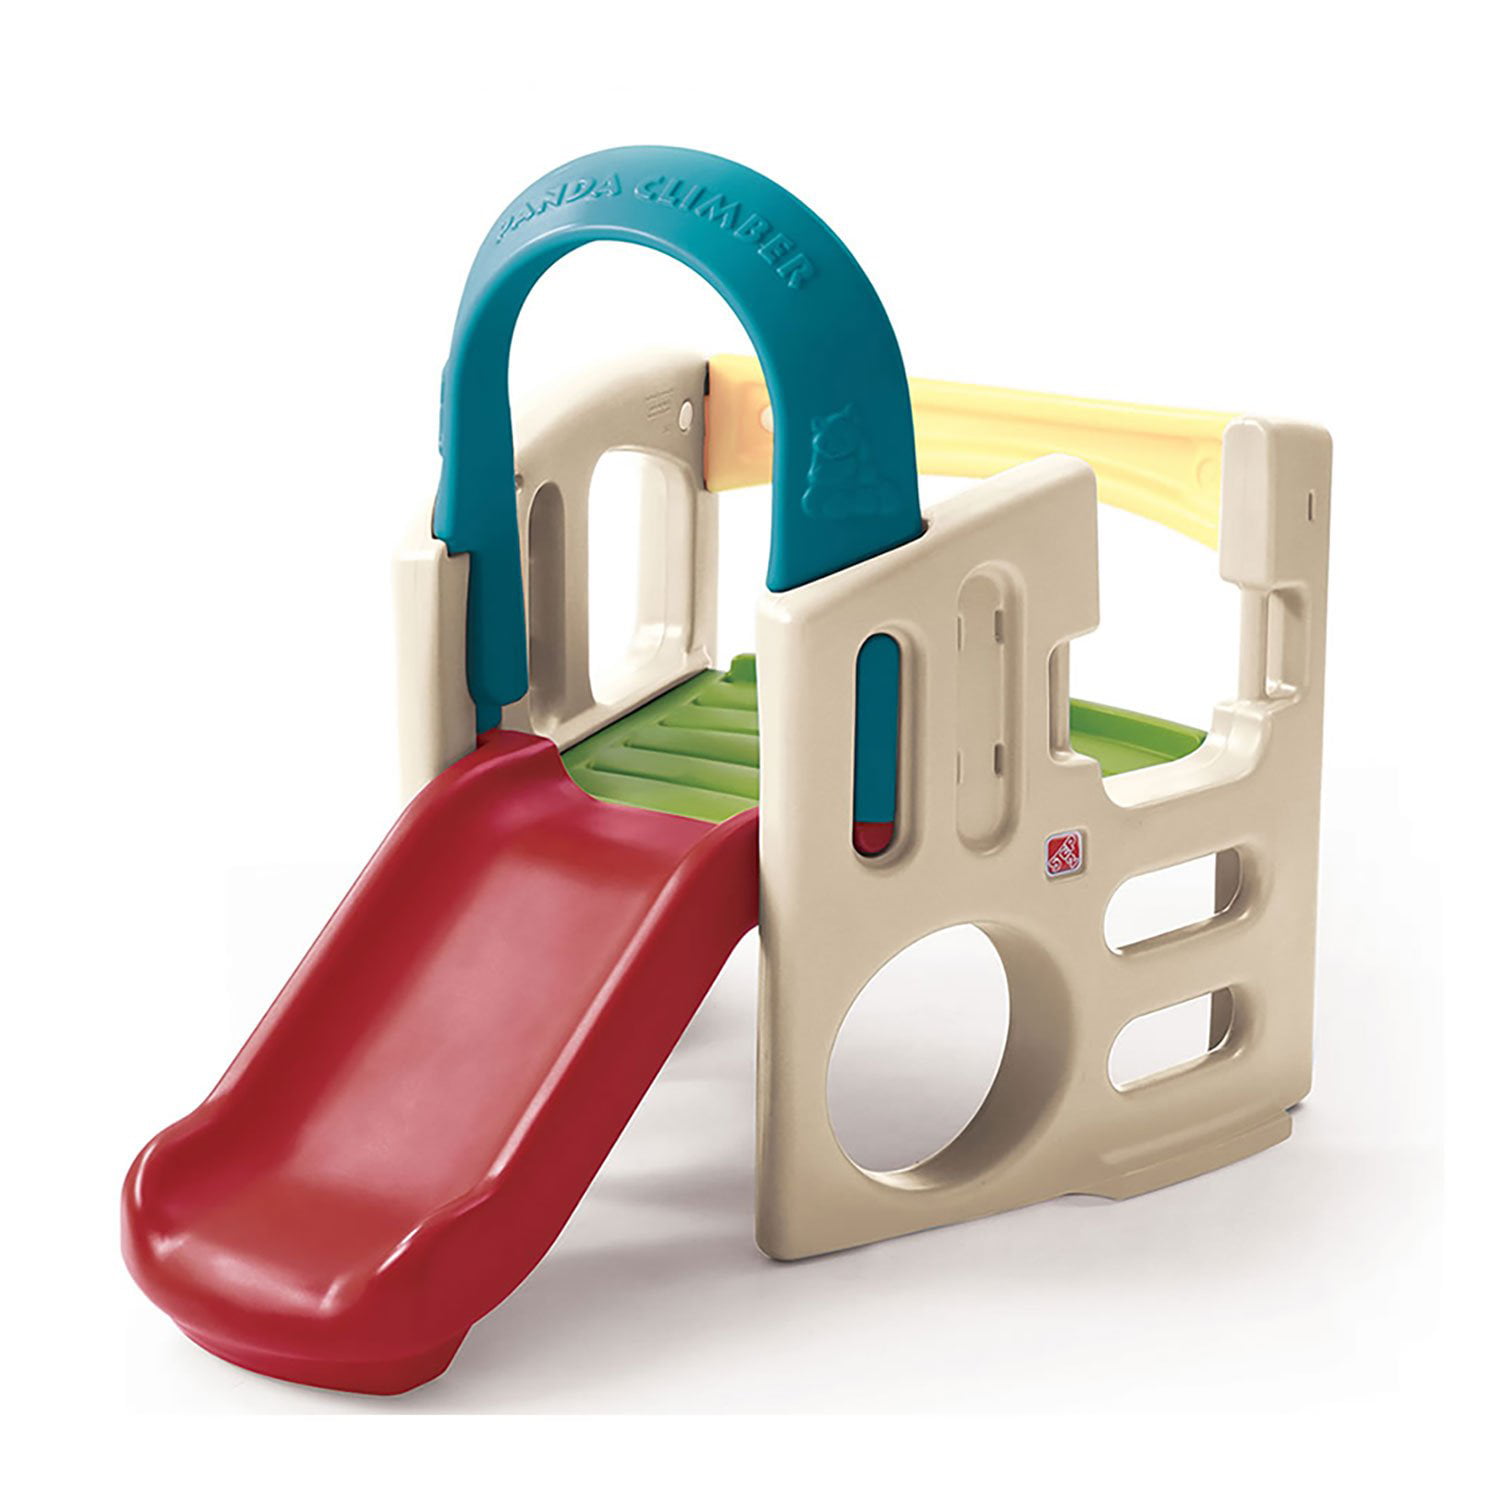 toddler outdoor playset with slide